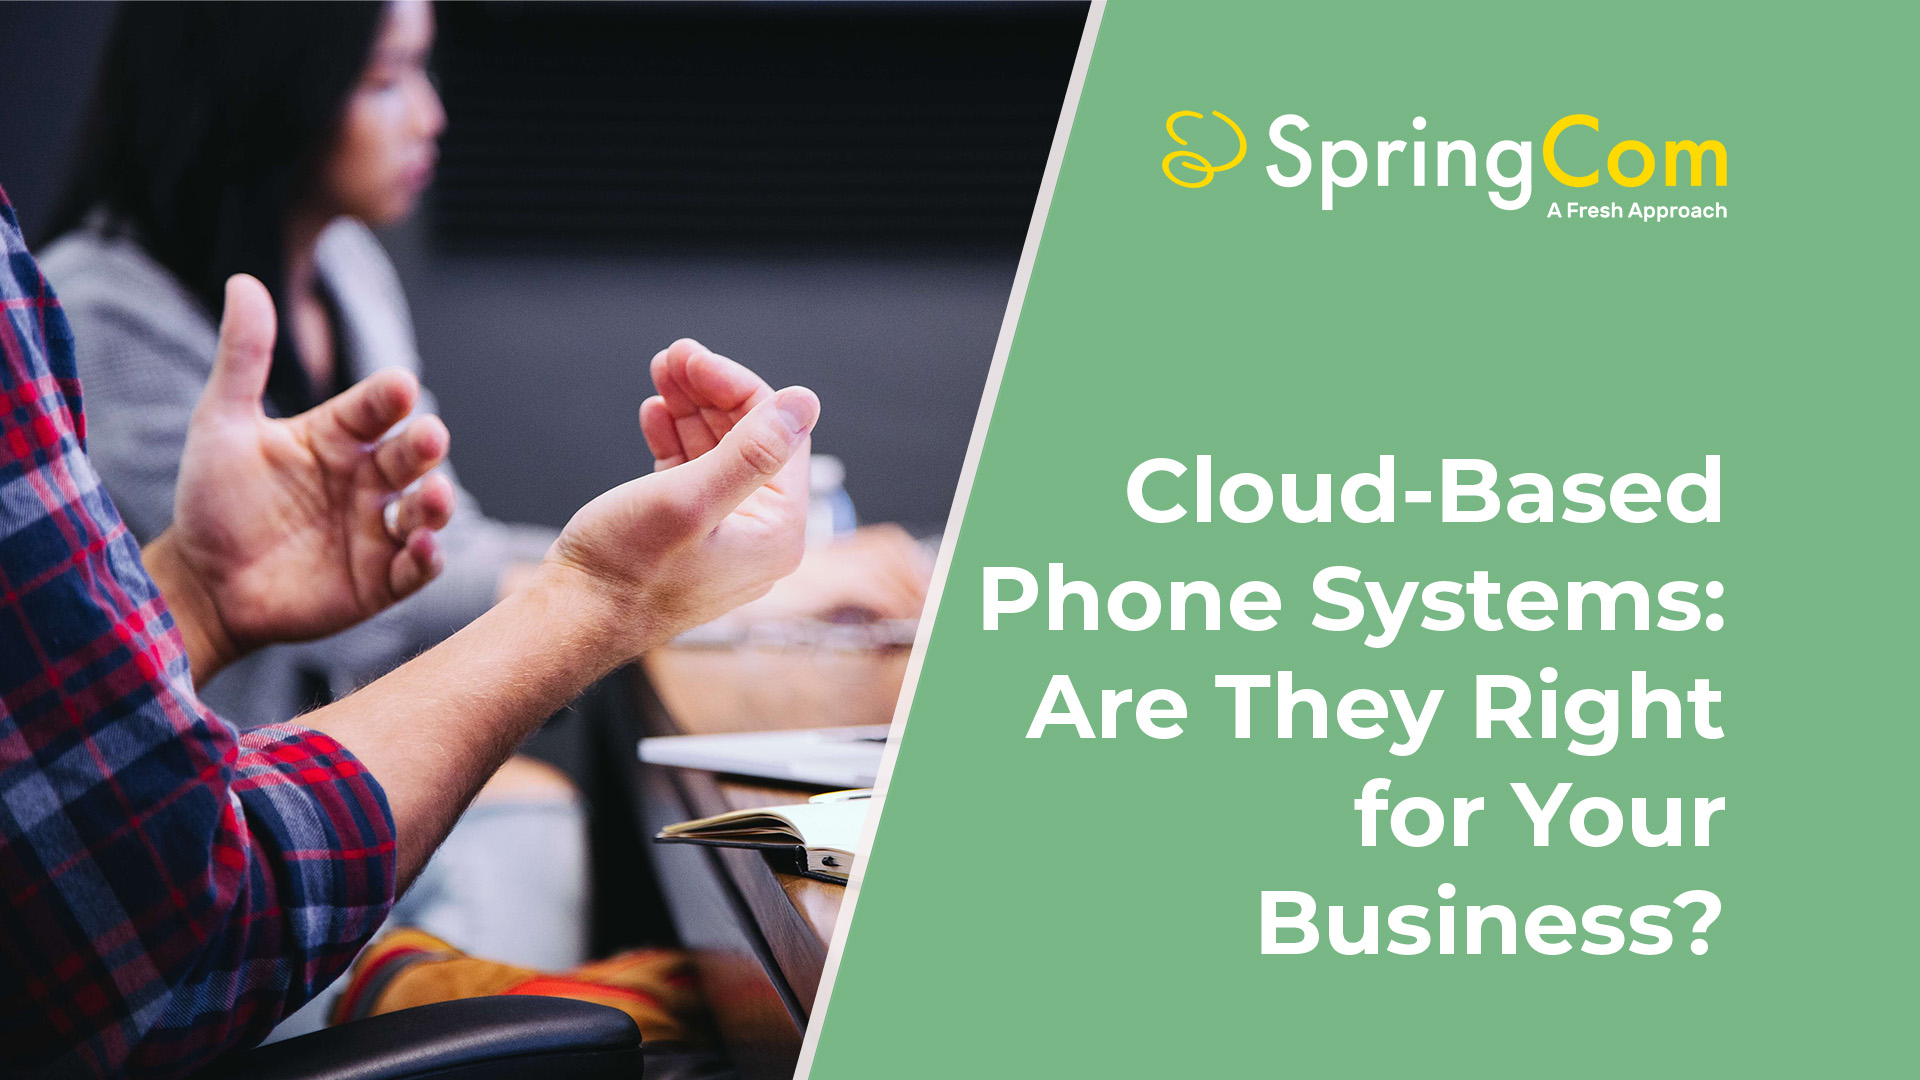 Cloud-Based Phone Systems: Are They Right for Your Business?